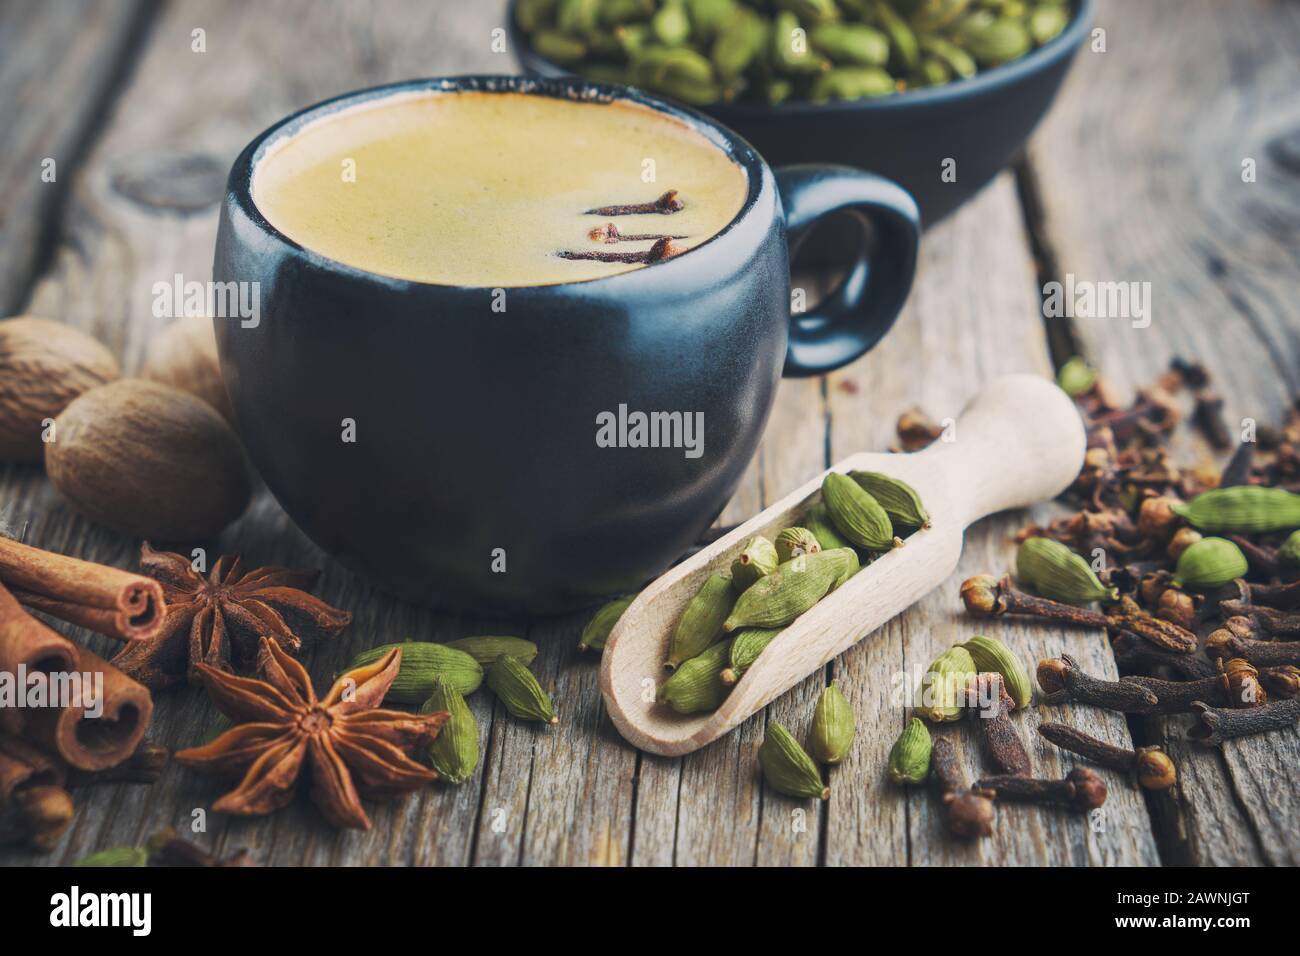 Cup of healthy ayurvedic masala tea or coffee with aromatic spices. Cinnamon sticks, cardamom, allspices and anise on wooden table. Stock Photo